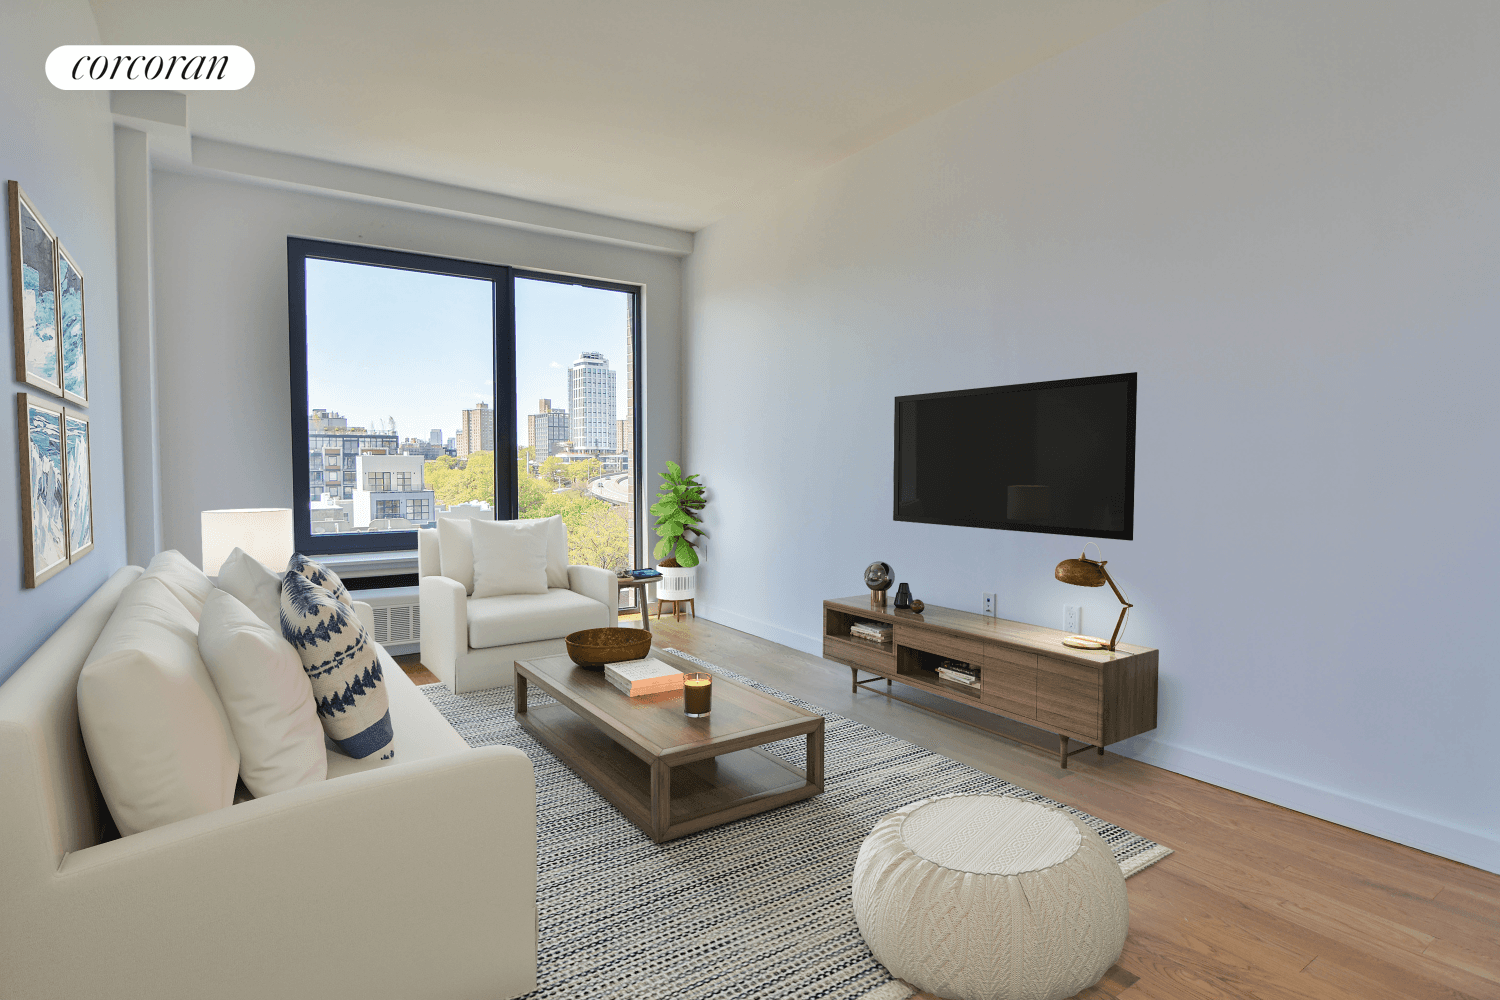 This extra spacious home features a large living room with a dining area, plus floor to ceiling windows allowing for open views and great sunlight.